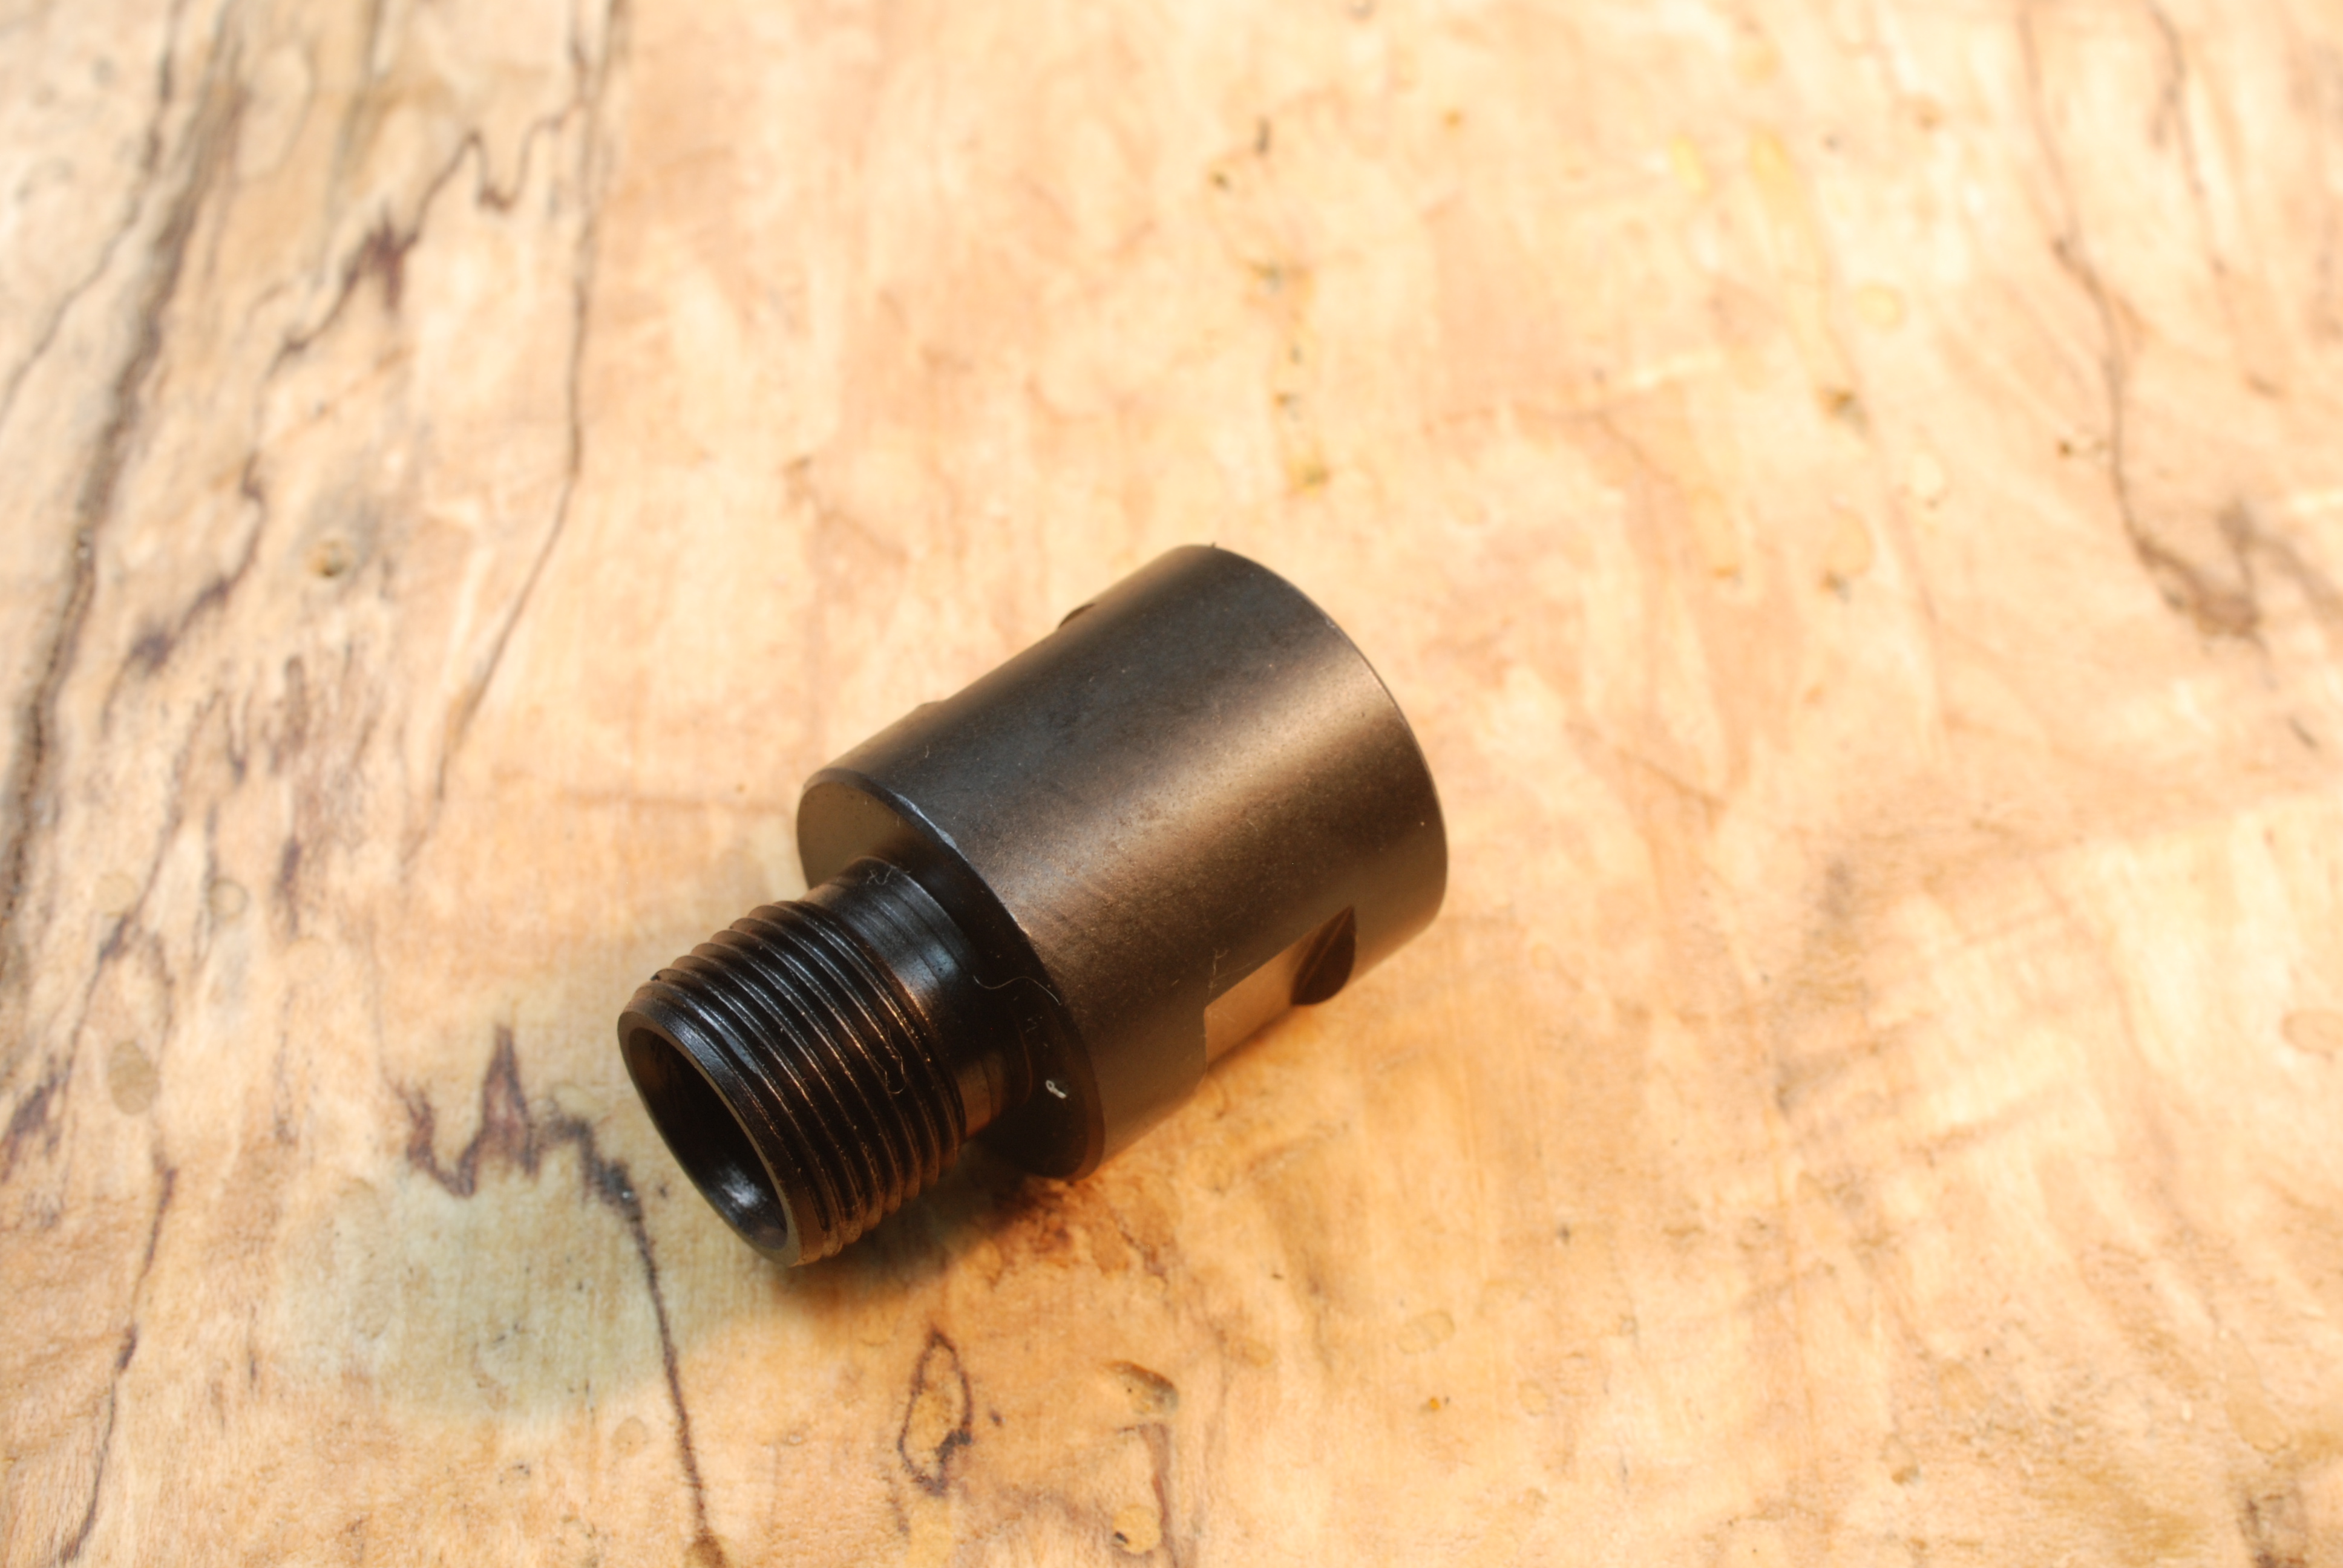 1/2" X28 Barrel End Threaded Pitch Adapter Female 1/2-20 Unf To Male 1/2-28 Unef 